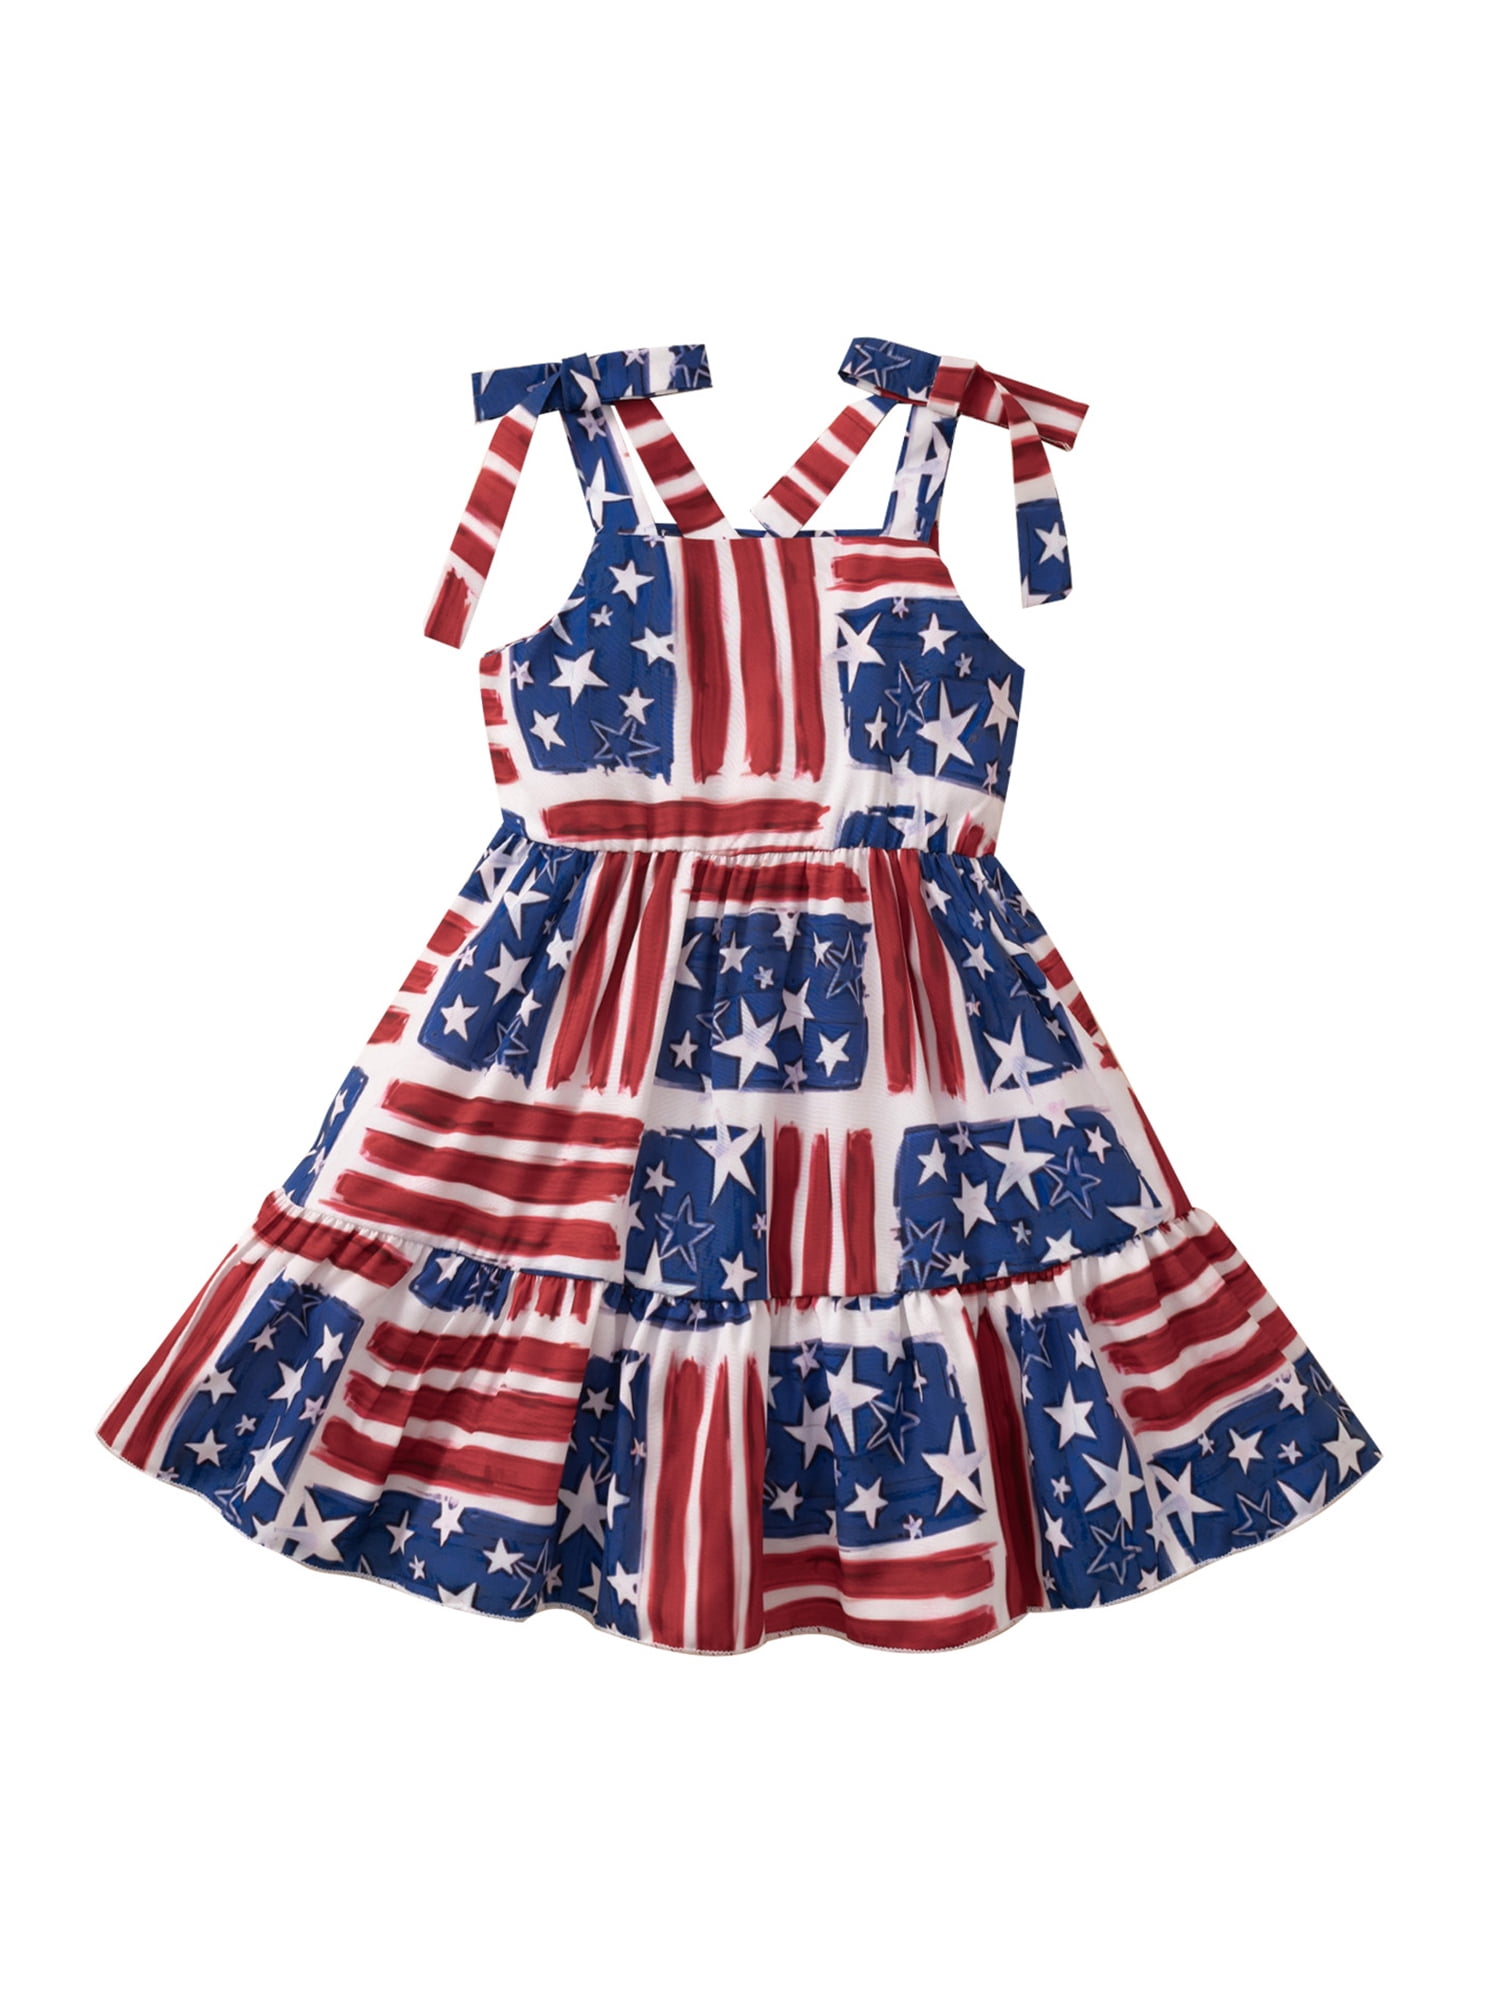 Jkerther 4th of July Outfits Toddler Kids Girls Birthday Clothes Summer  Casual Sleeveless Print A-Line Dress Independence Day Beach Party Wear 